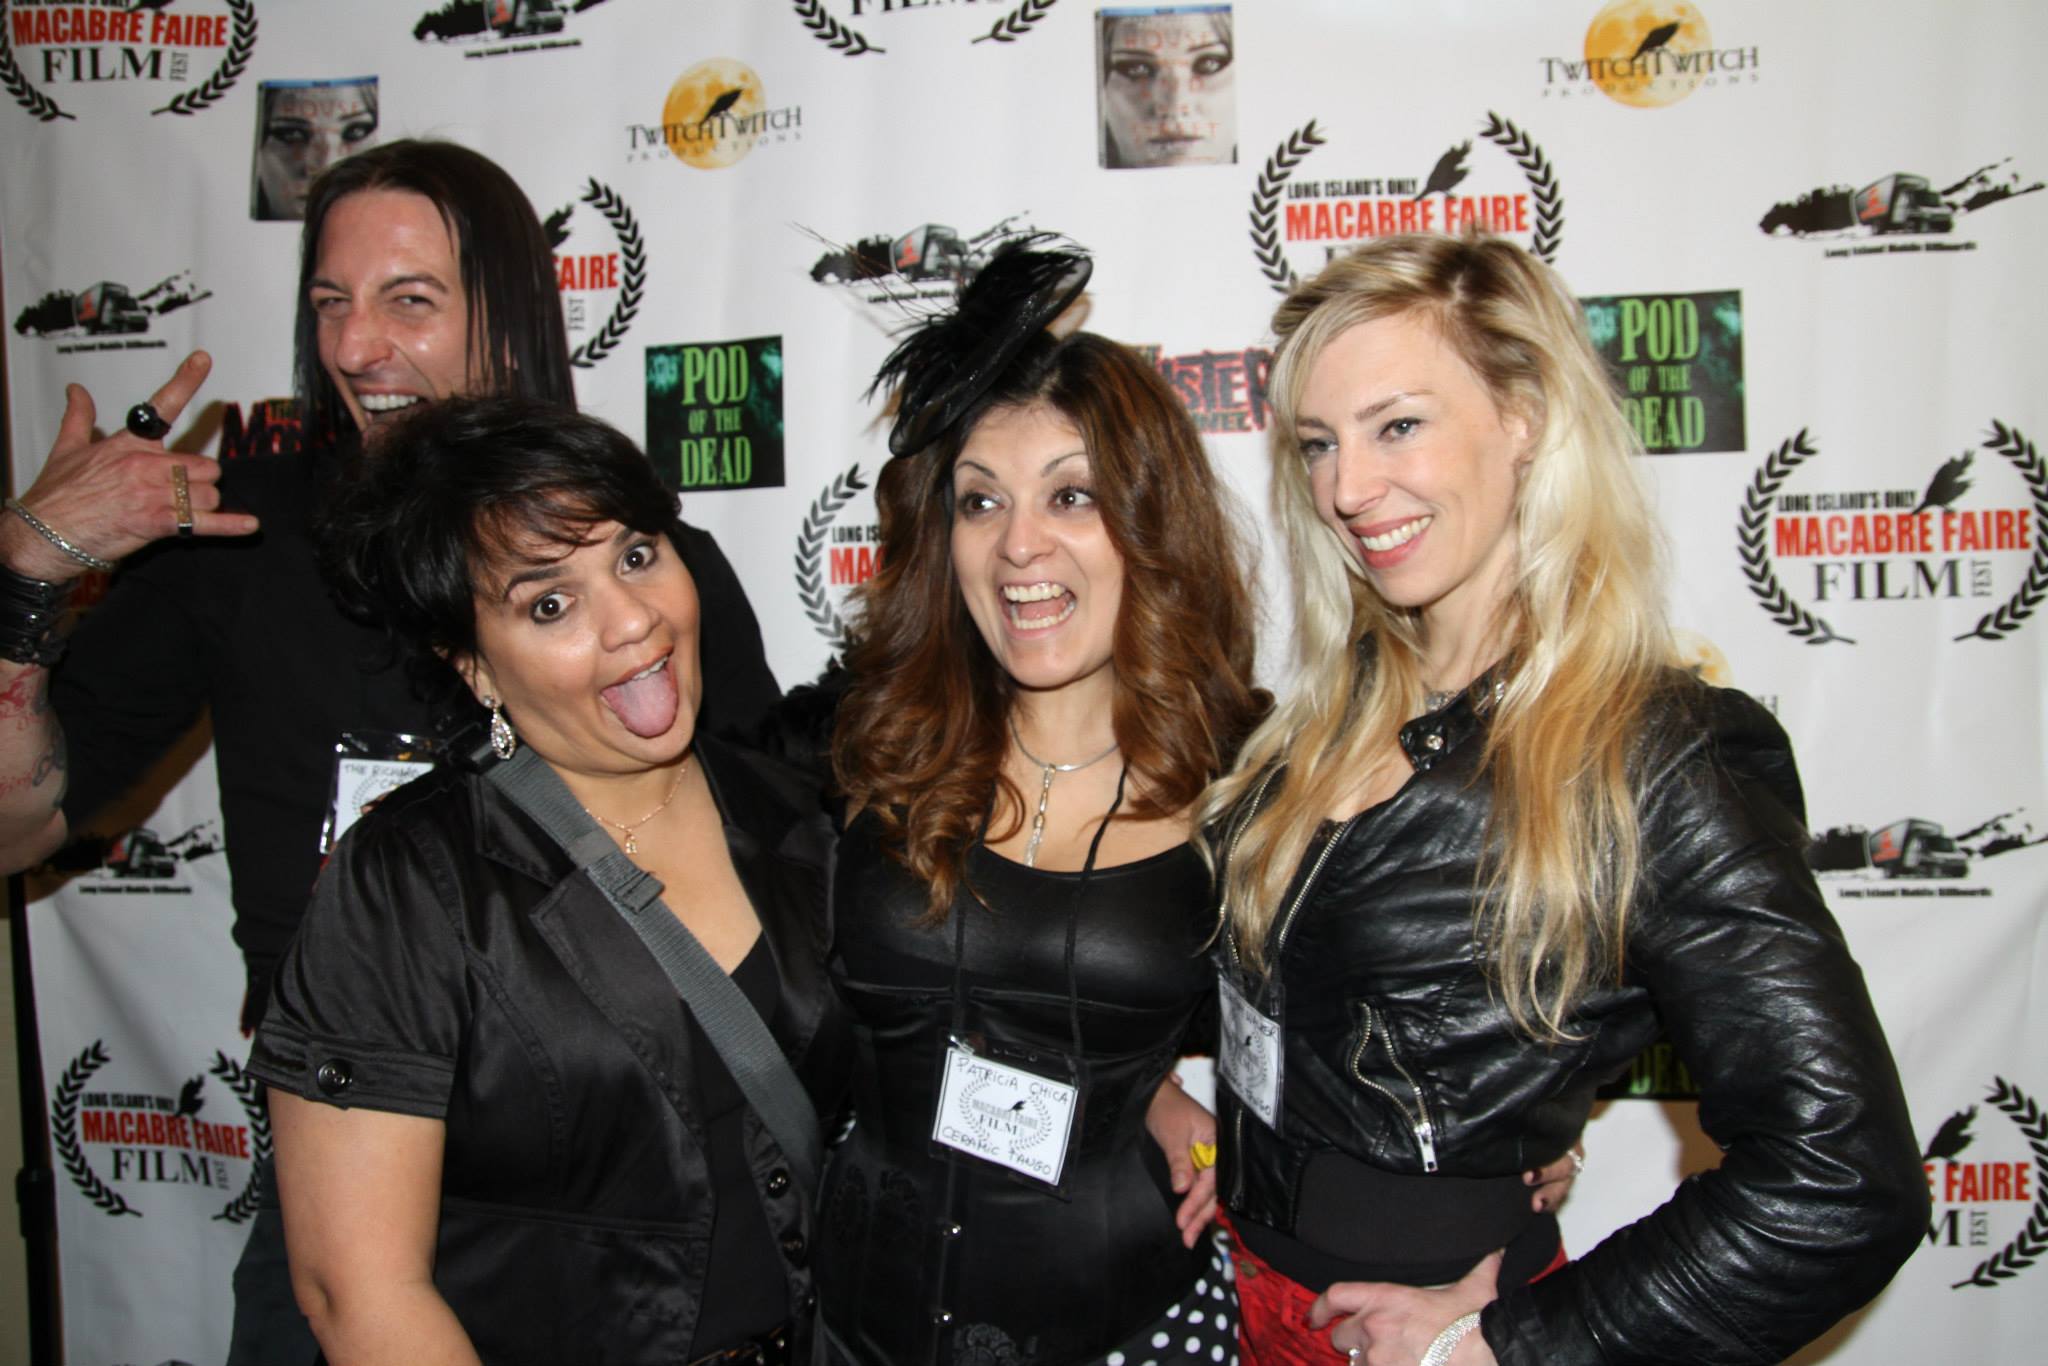 Badass crew with founder of Macabre Faire, LC Macabre being silly on the red carpet!